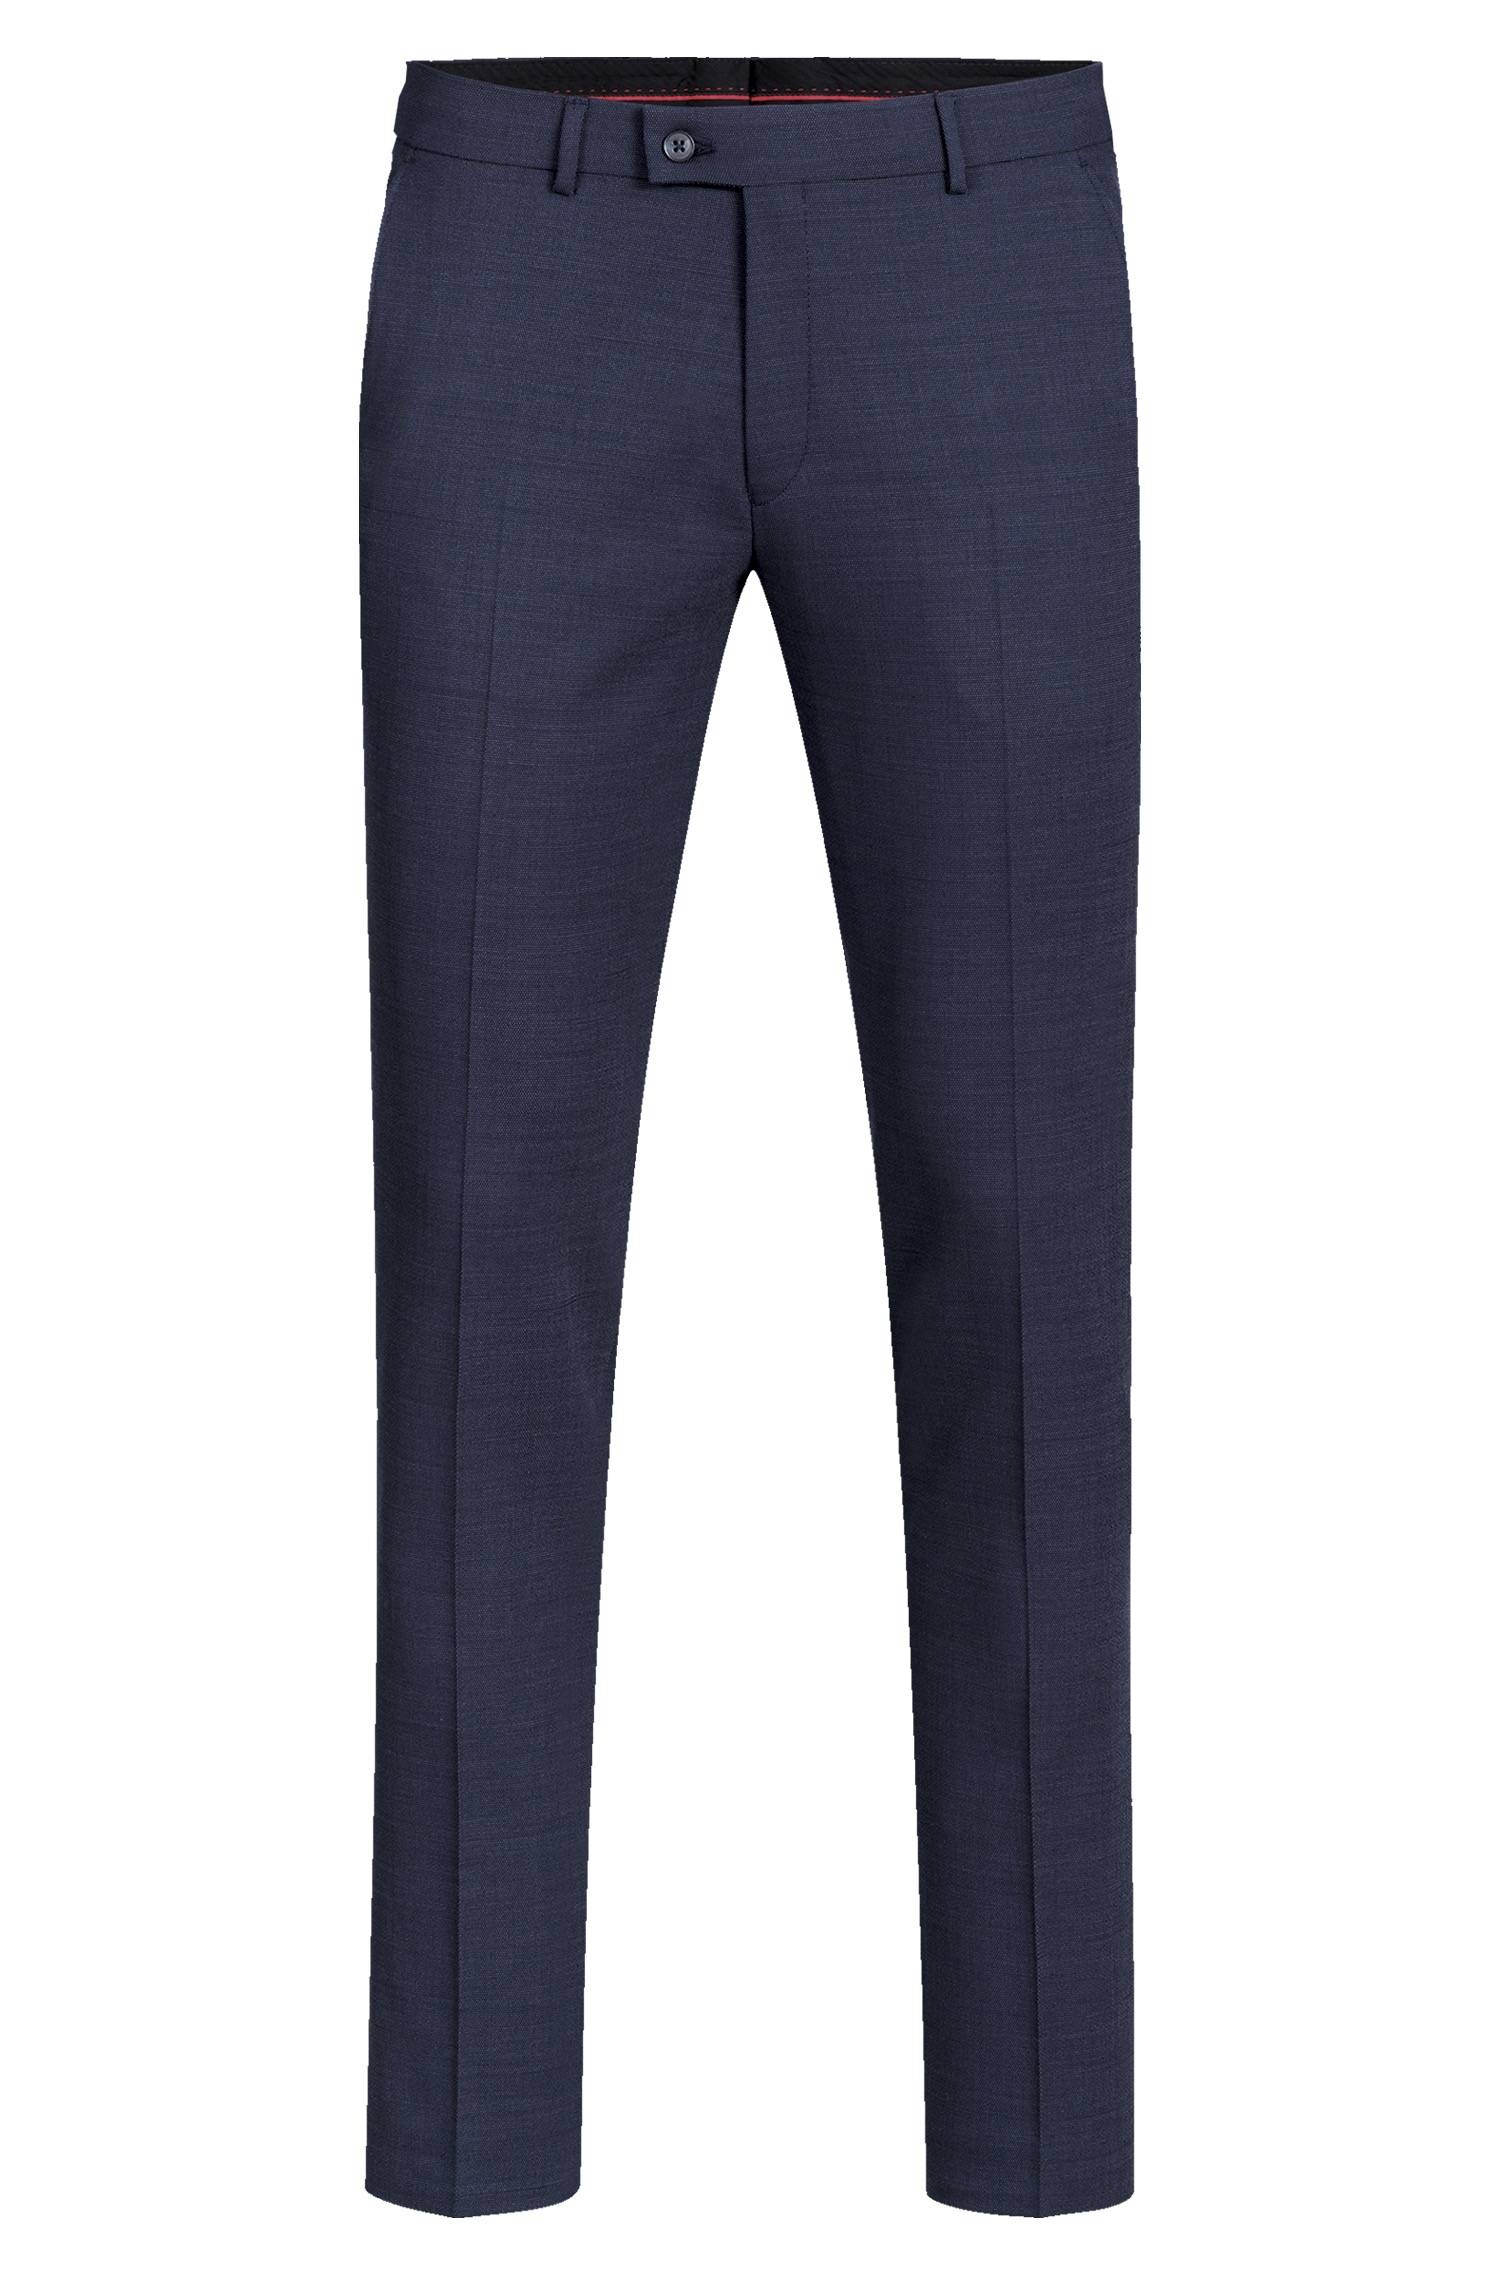 Men's trousers pinpoint MODERN 37.5 slim fit